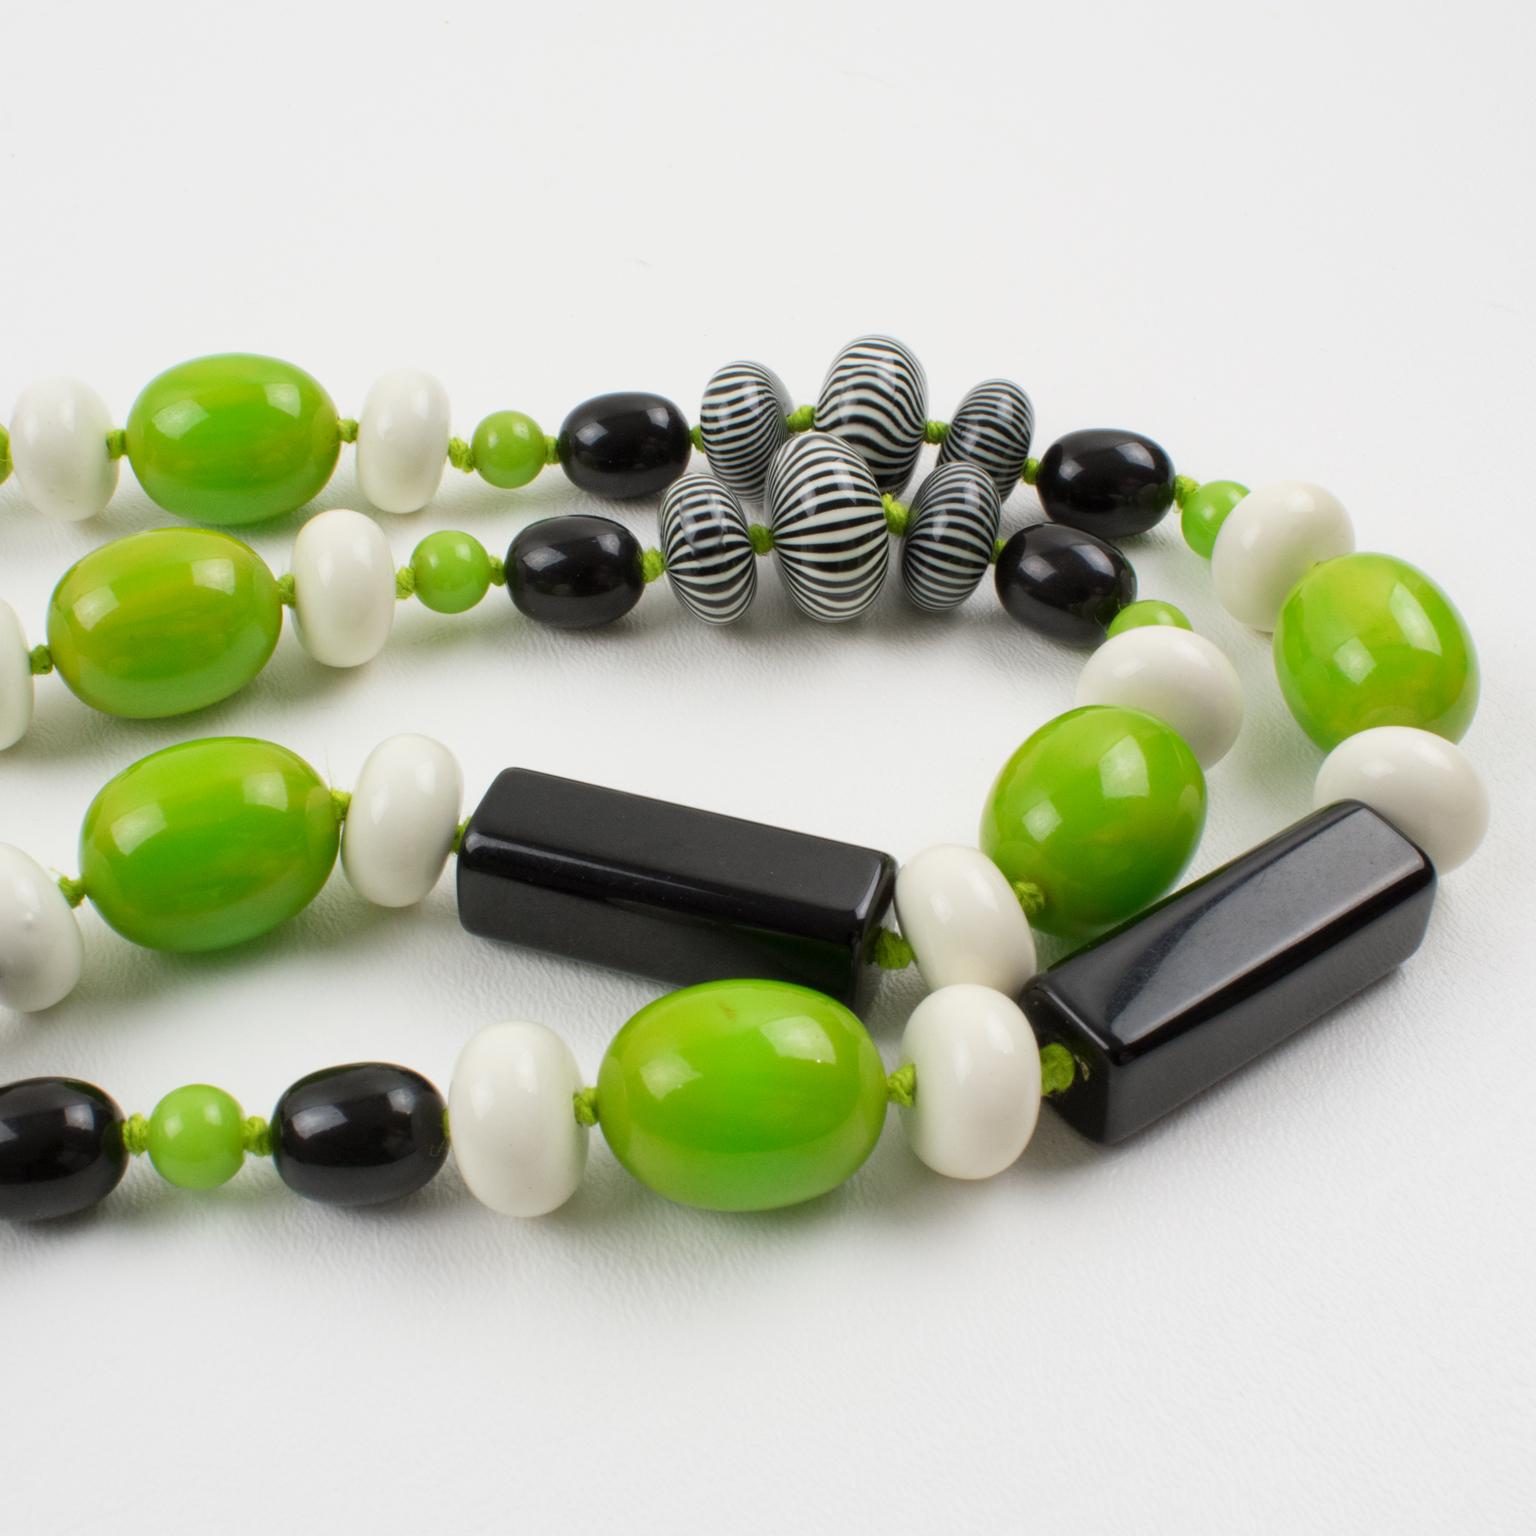 Bakelite and Lucite Necklace Extra Long Shape Black, White and Apple Green Beads 3